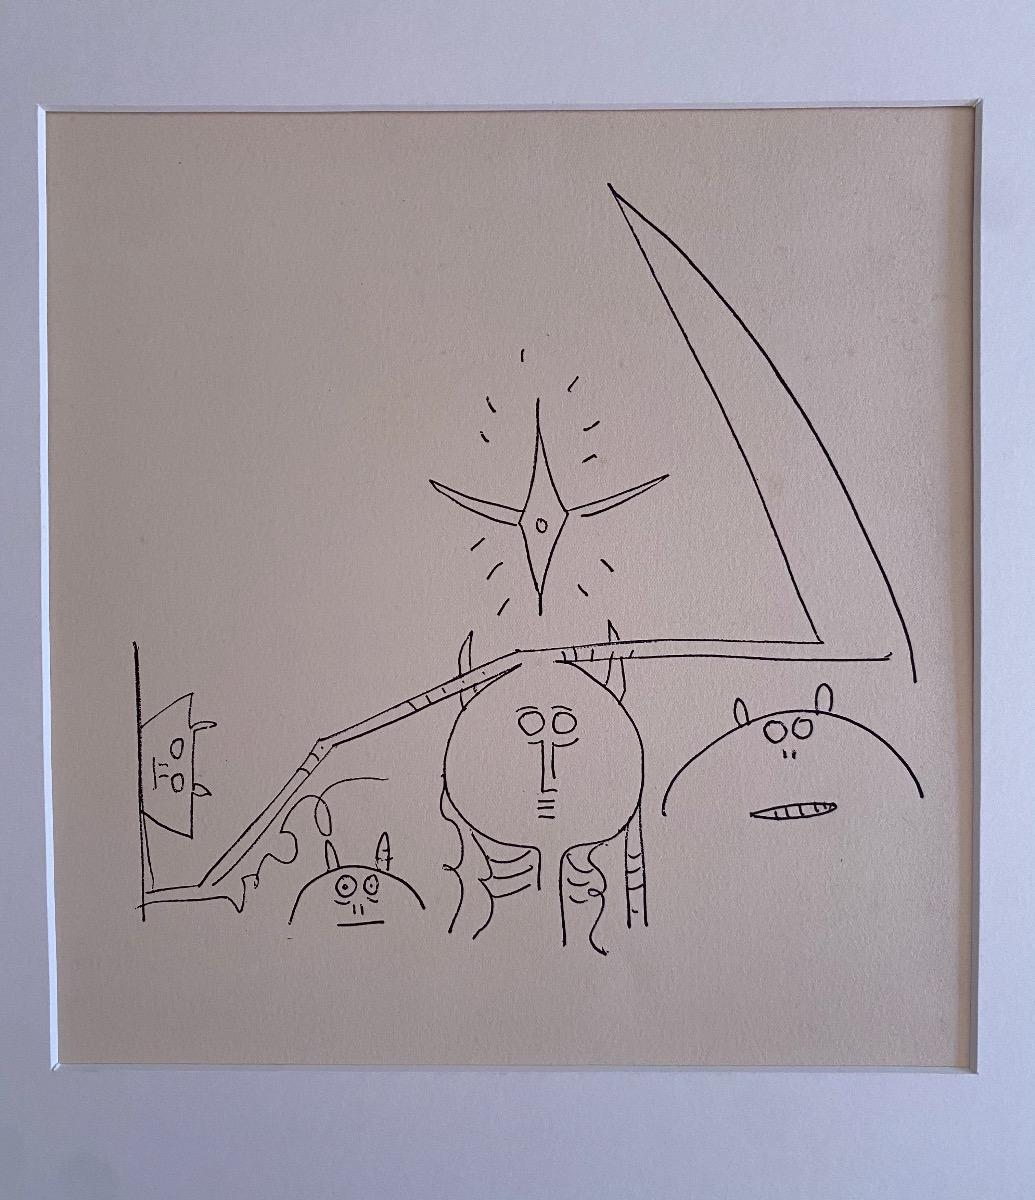 Composition - Lithograph by Wifredo Lam - 1970s